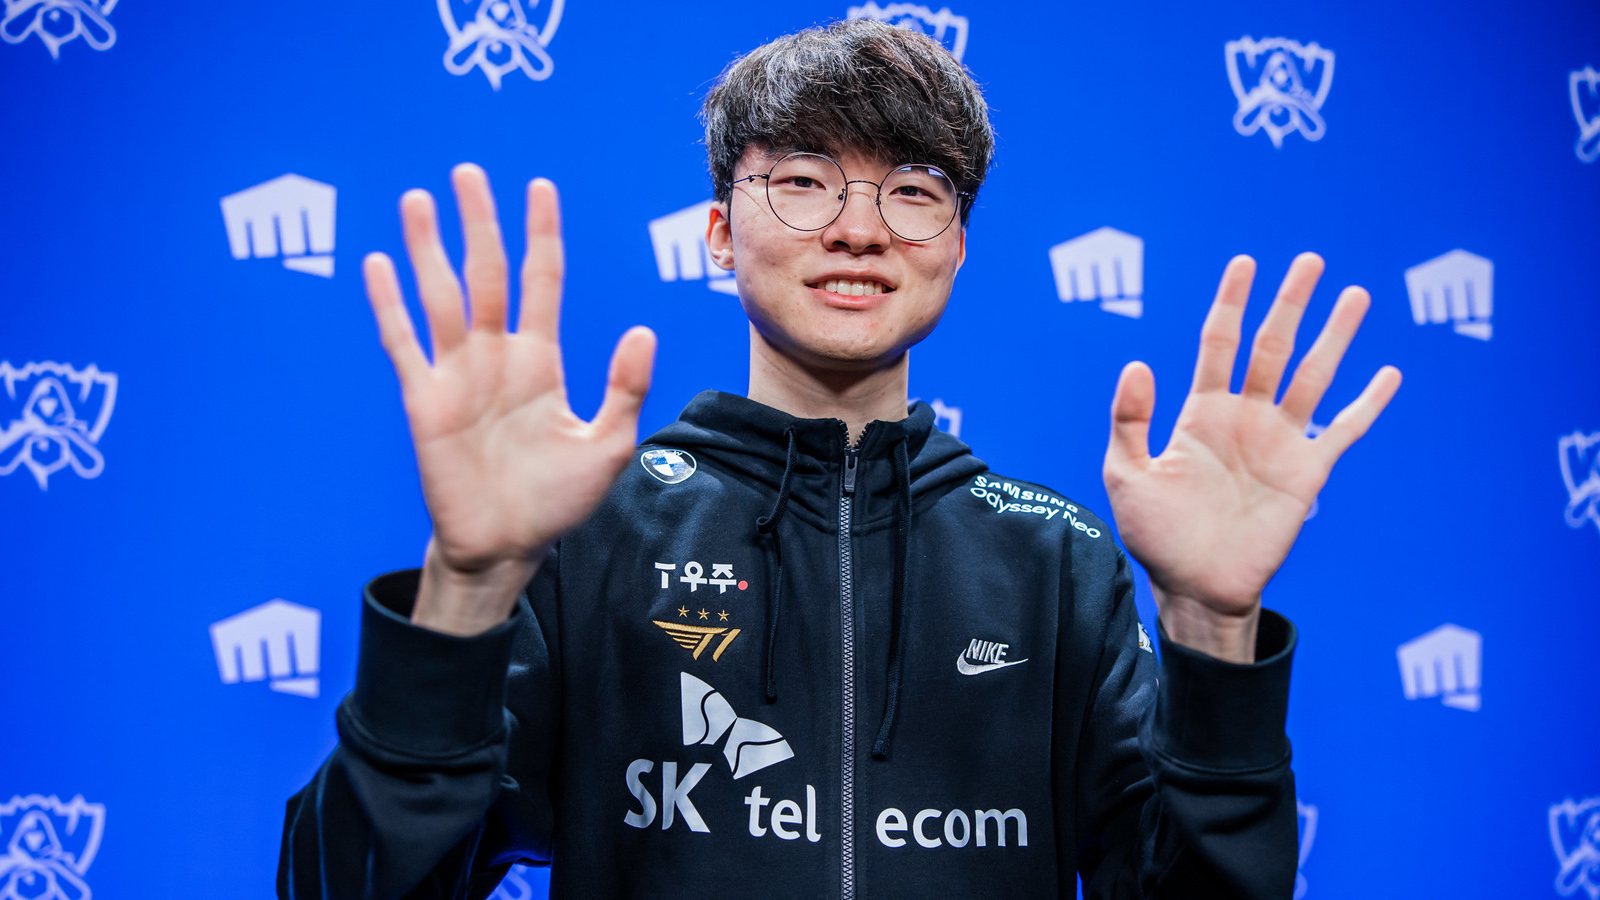 faker back in LCK